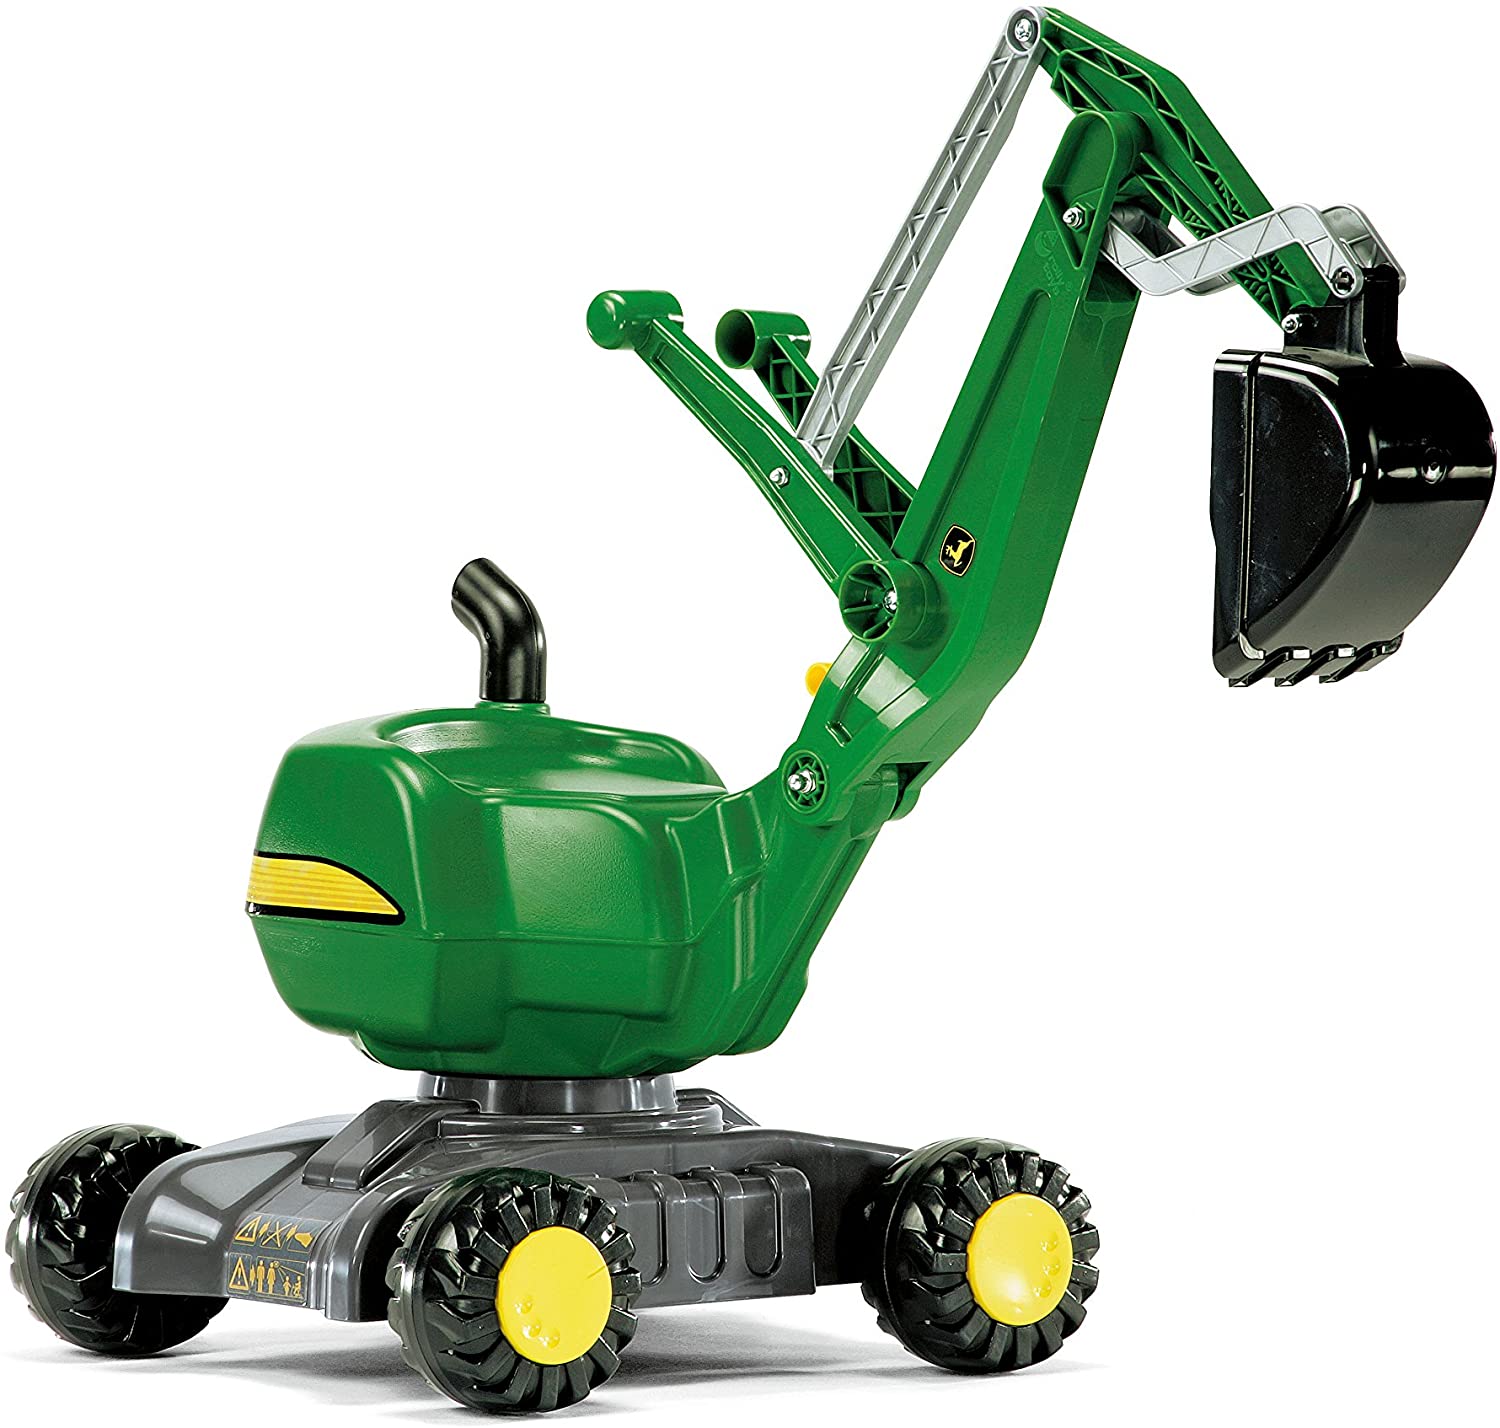 ROLLY TOYS 421022 ROLLY DIGGER JOHN DEERE